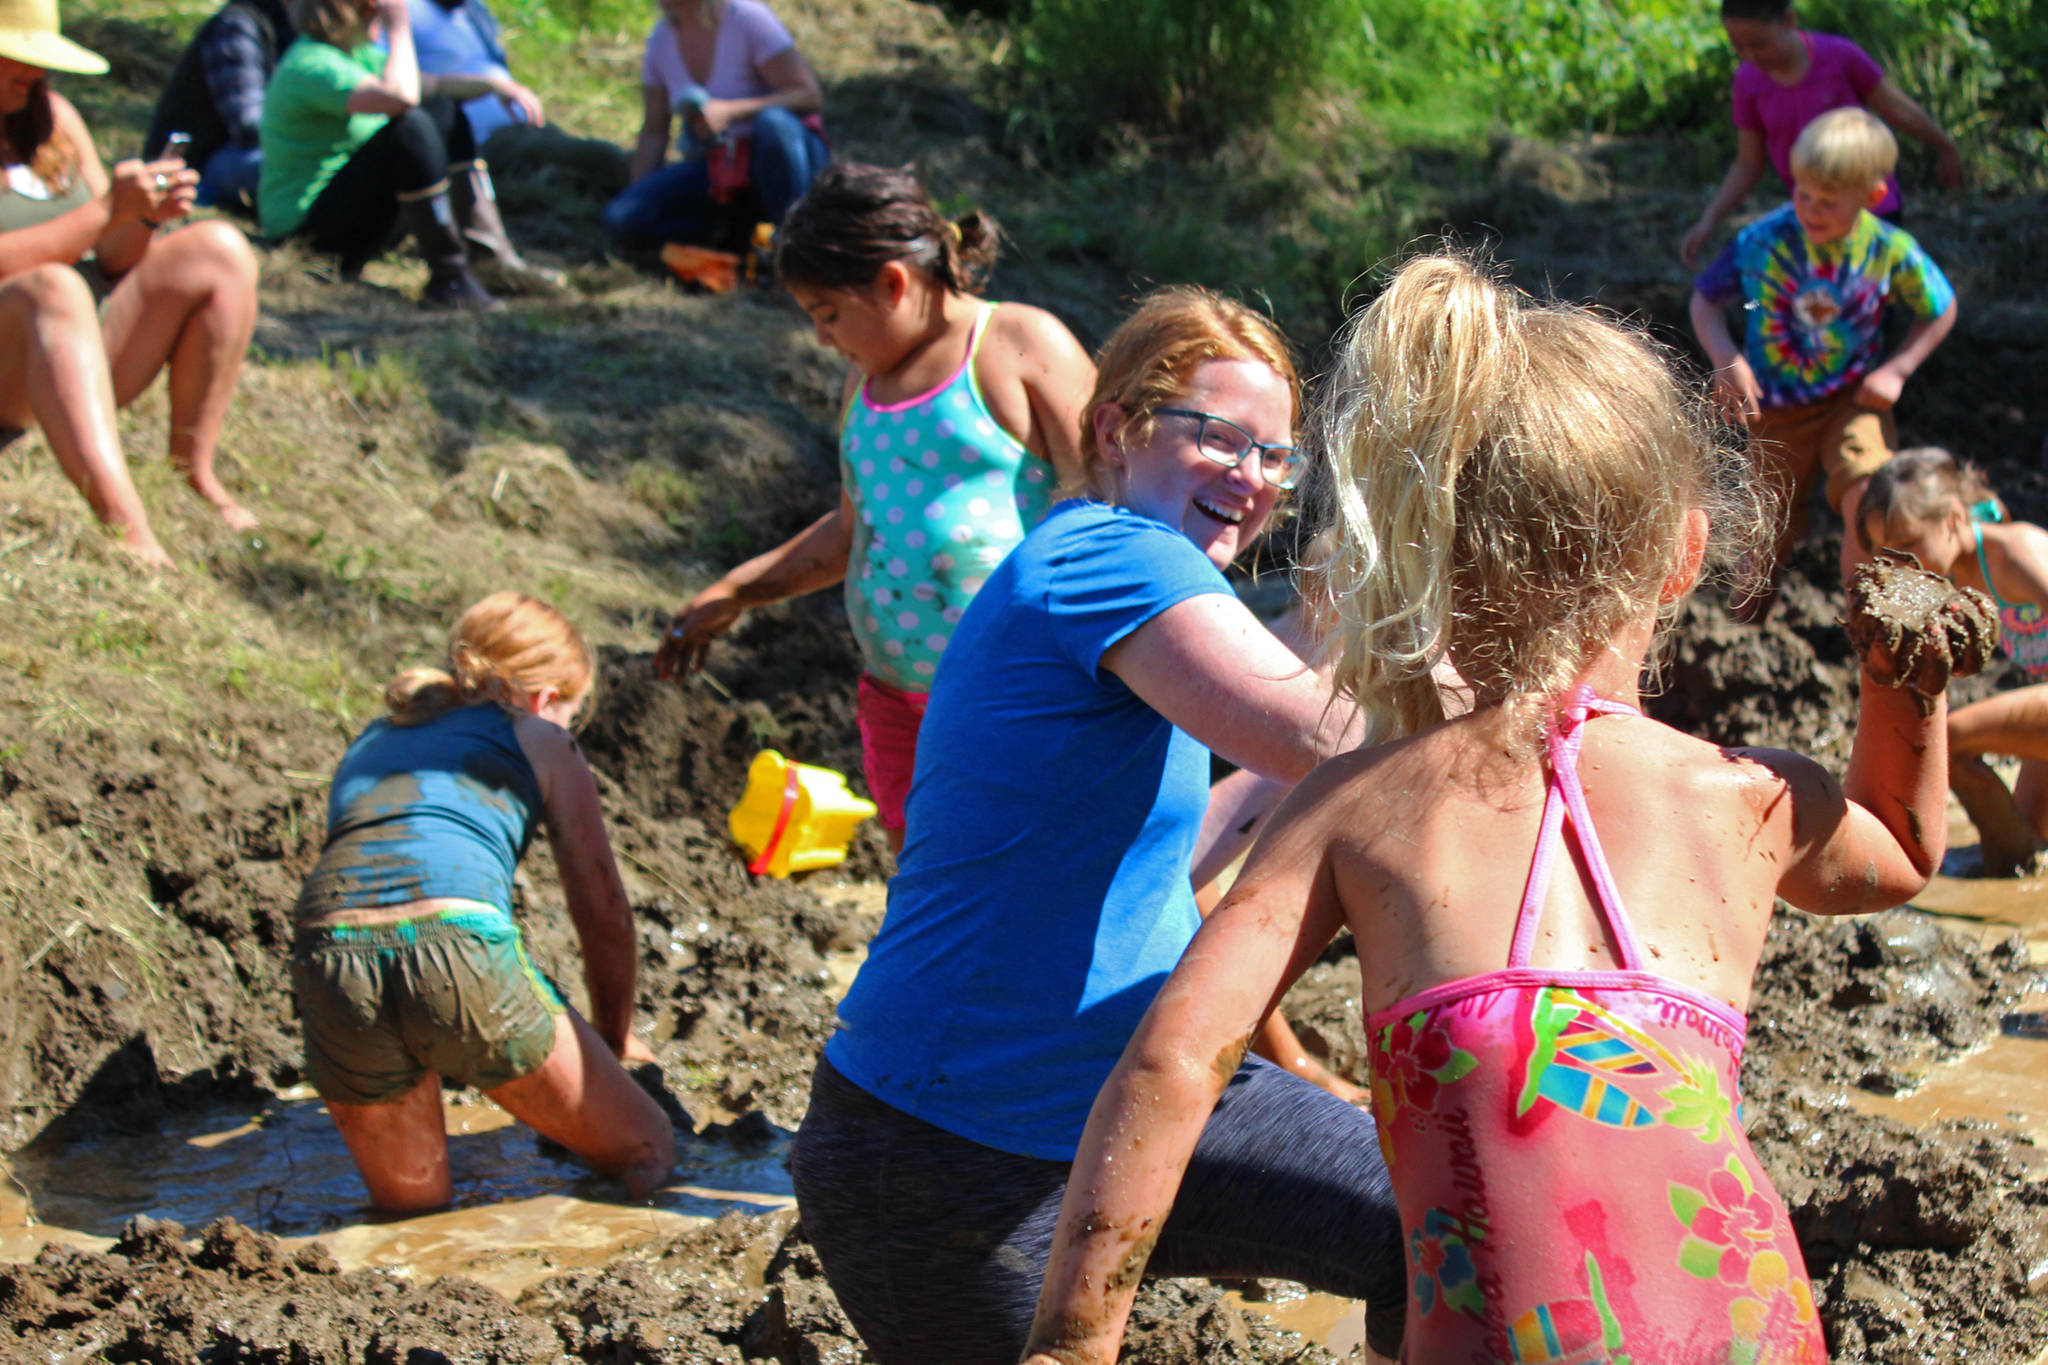 Photo by Megan Pacer/Homer News Lisa Asselin, background, laughs as she braces herself for a handful of mud about to be flung by Isla Brown, 4, during this year’s Mud Wallow on Saturday, July 22, 2017 at Cottonwood Horse Park in Homer, Alaska. Asselin was one of the event’s coordinators.